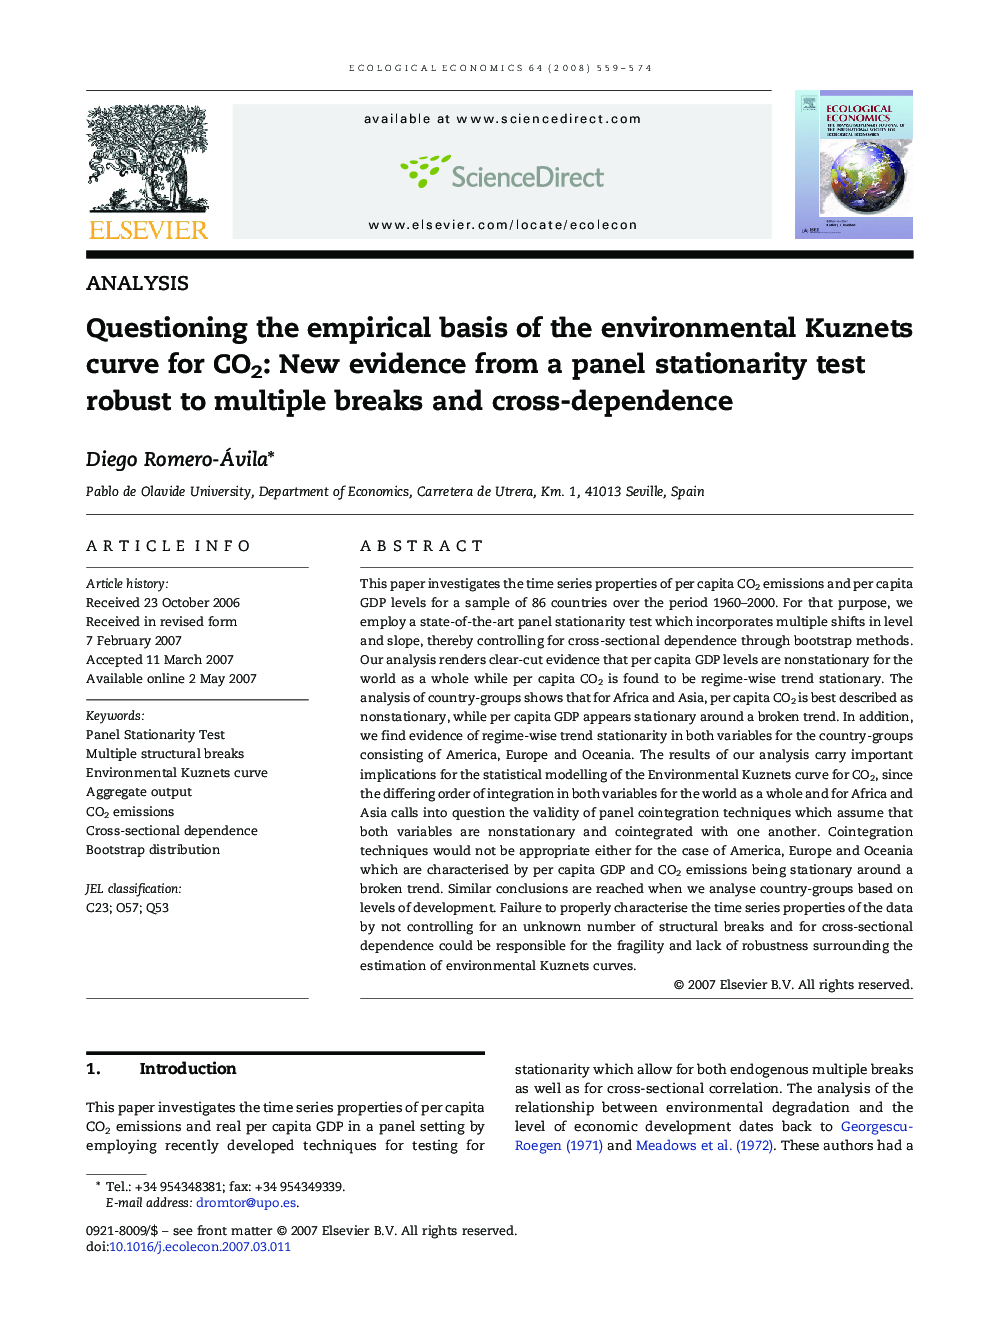 Questioning the empirical basis of the environmental Kuznets curve for CO2: New evidence from a panel stationarity test robust to multiple breaks and cross-dependence